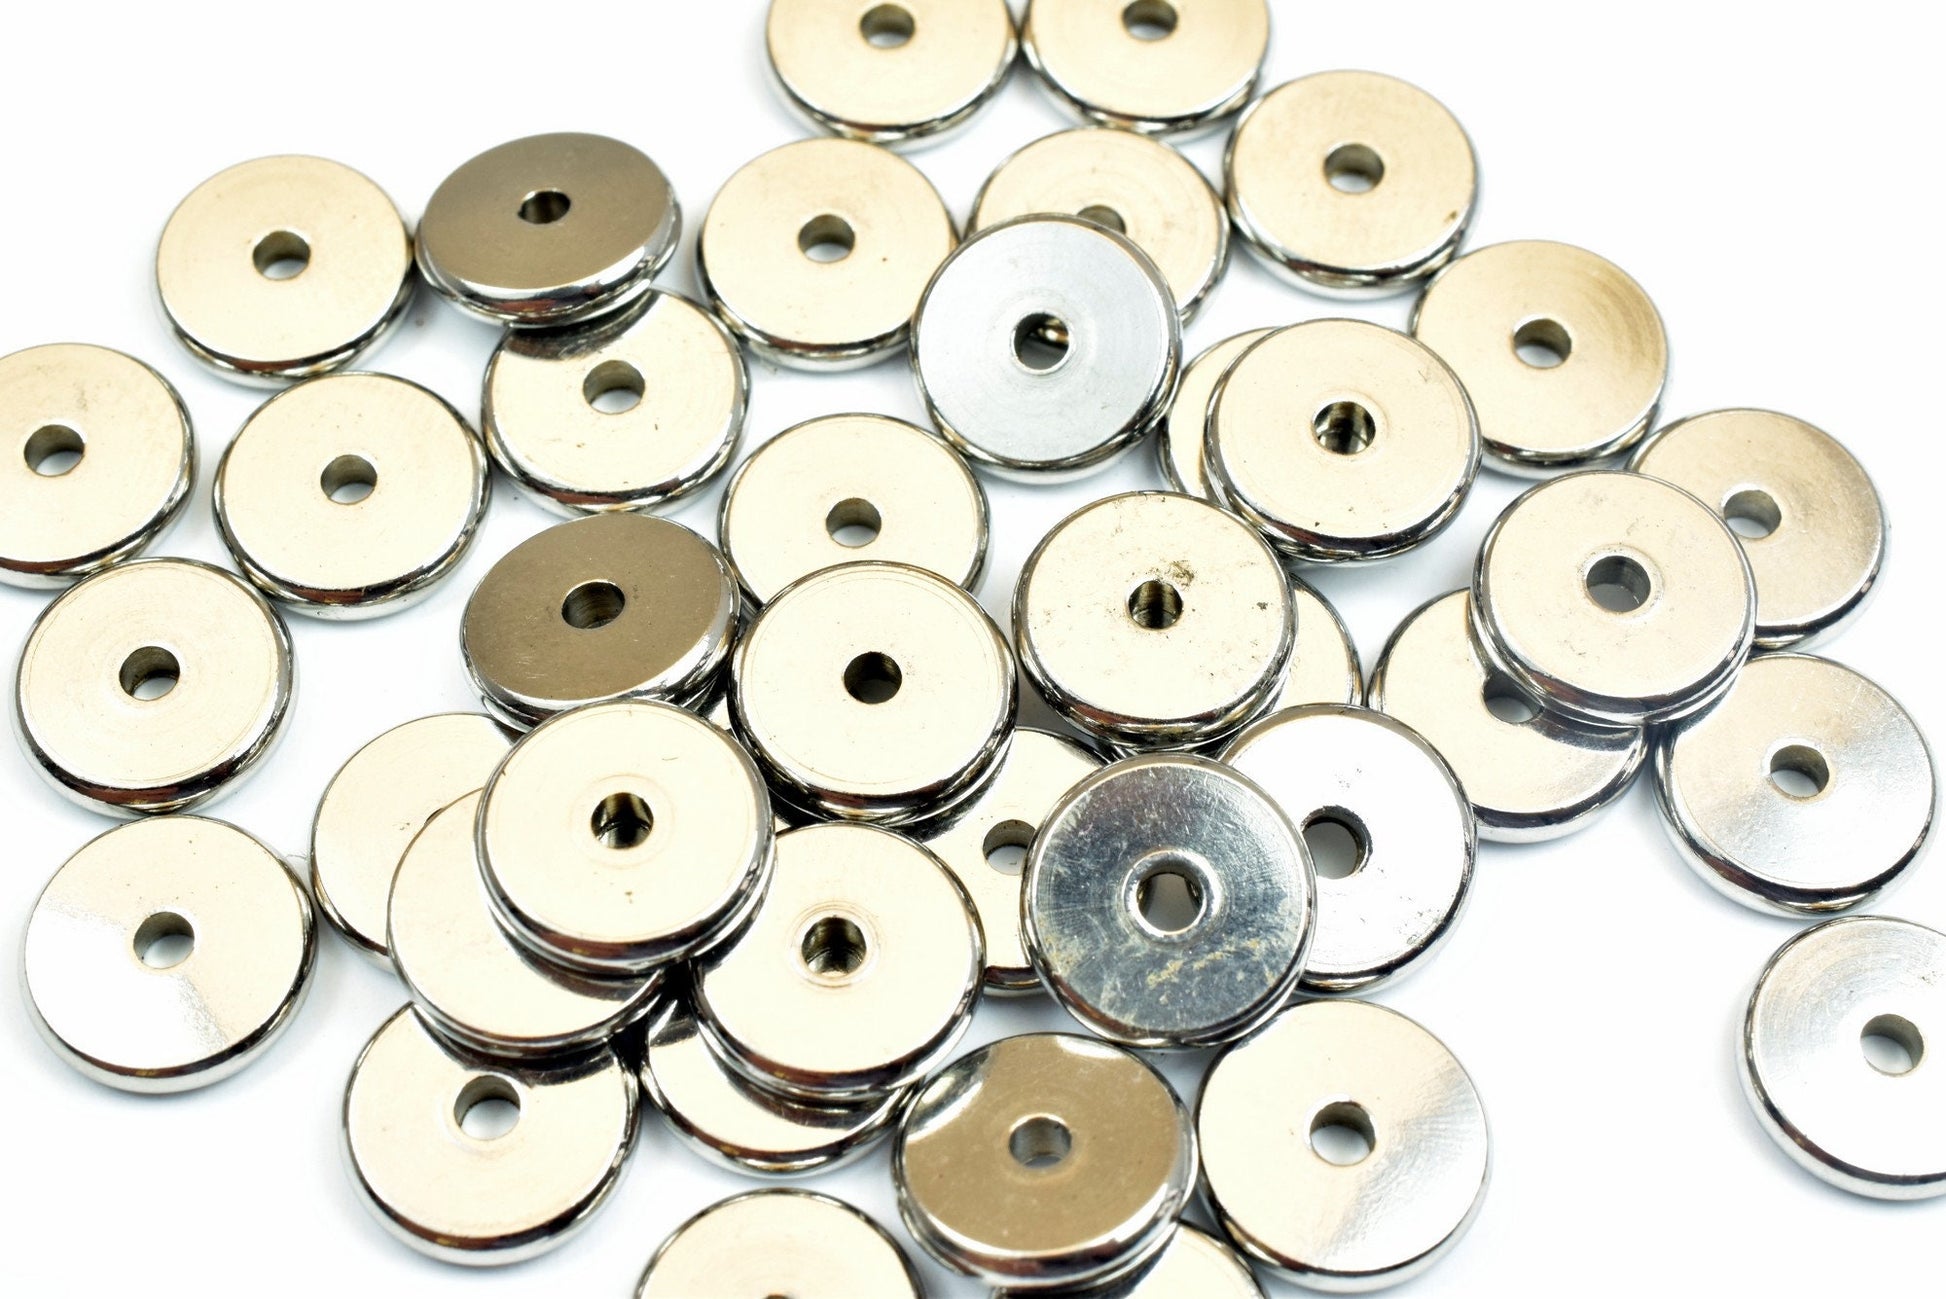 Bulk Stainless Steel Rondelle Plain Spacer Beads Size 6mm, 8mm, 10mm Jewelry Finding Supply For Jewelry Making